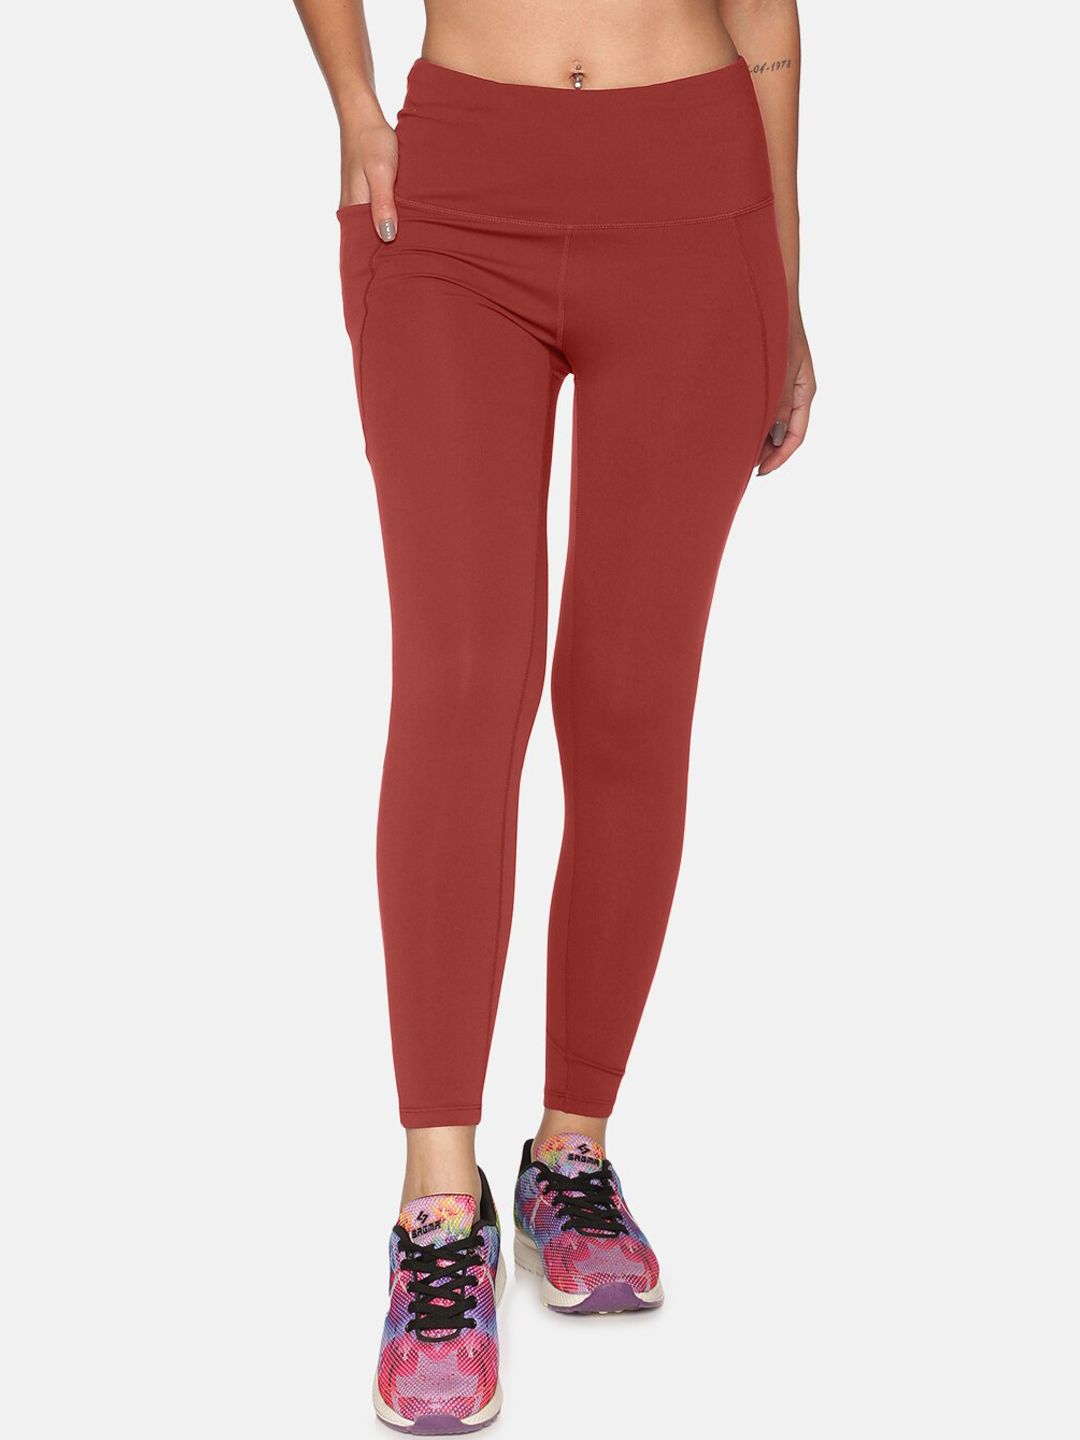 BlissClub Women Rust Super Stretchy and High Waisted The Ultimate Leggings Price in India